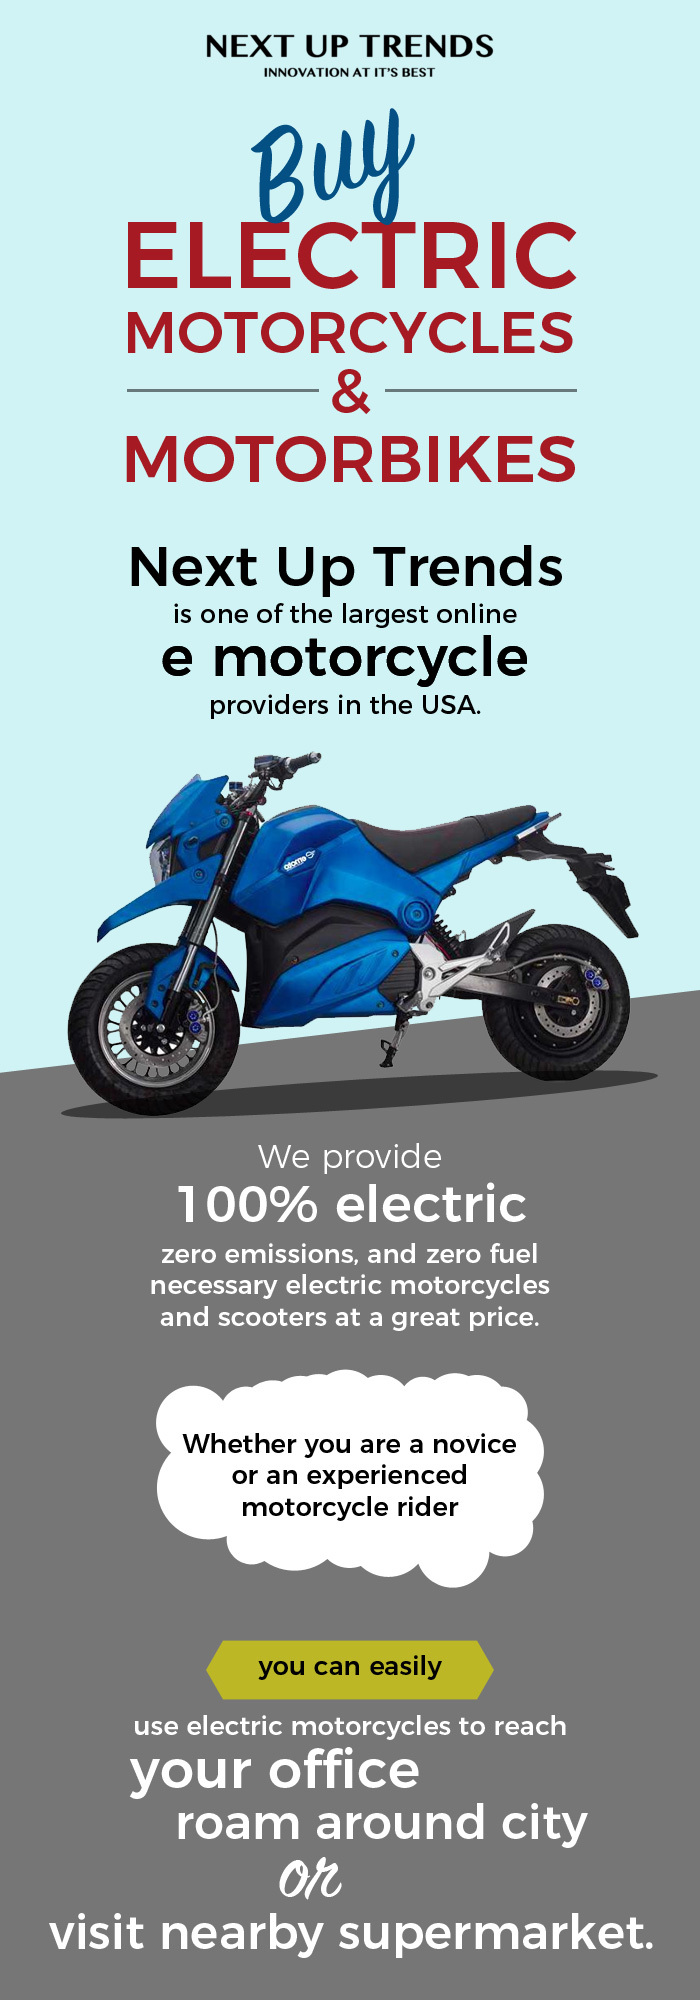 Next Up Trends – A Leading Online Store to Buy Electric Motorcycles & Motorbikes